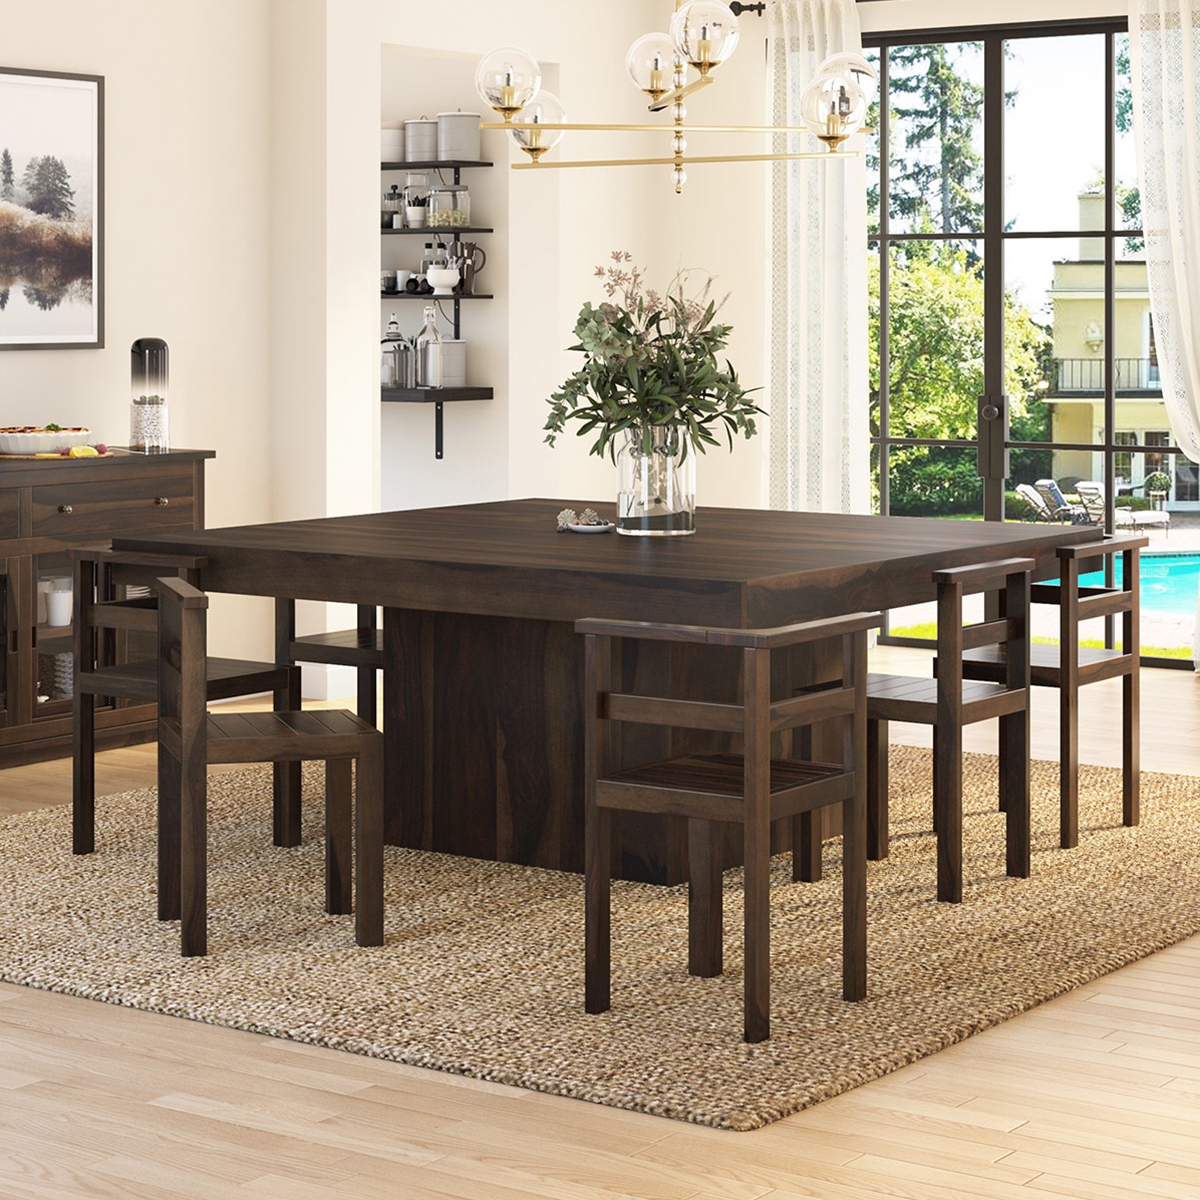 https://www.sierralivingconcepts.com/images/thumbs/0393094_pescara-rustic-solid-wood-pedestal-9-piece-square-dining-table-set.jpeg